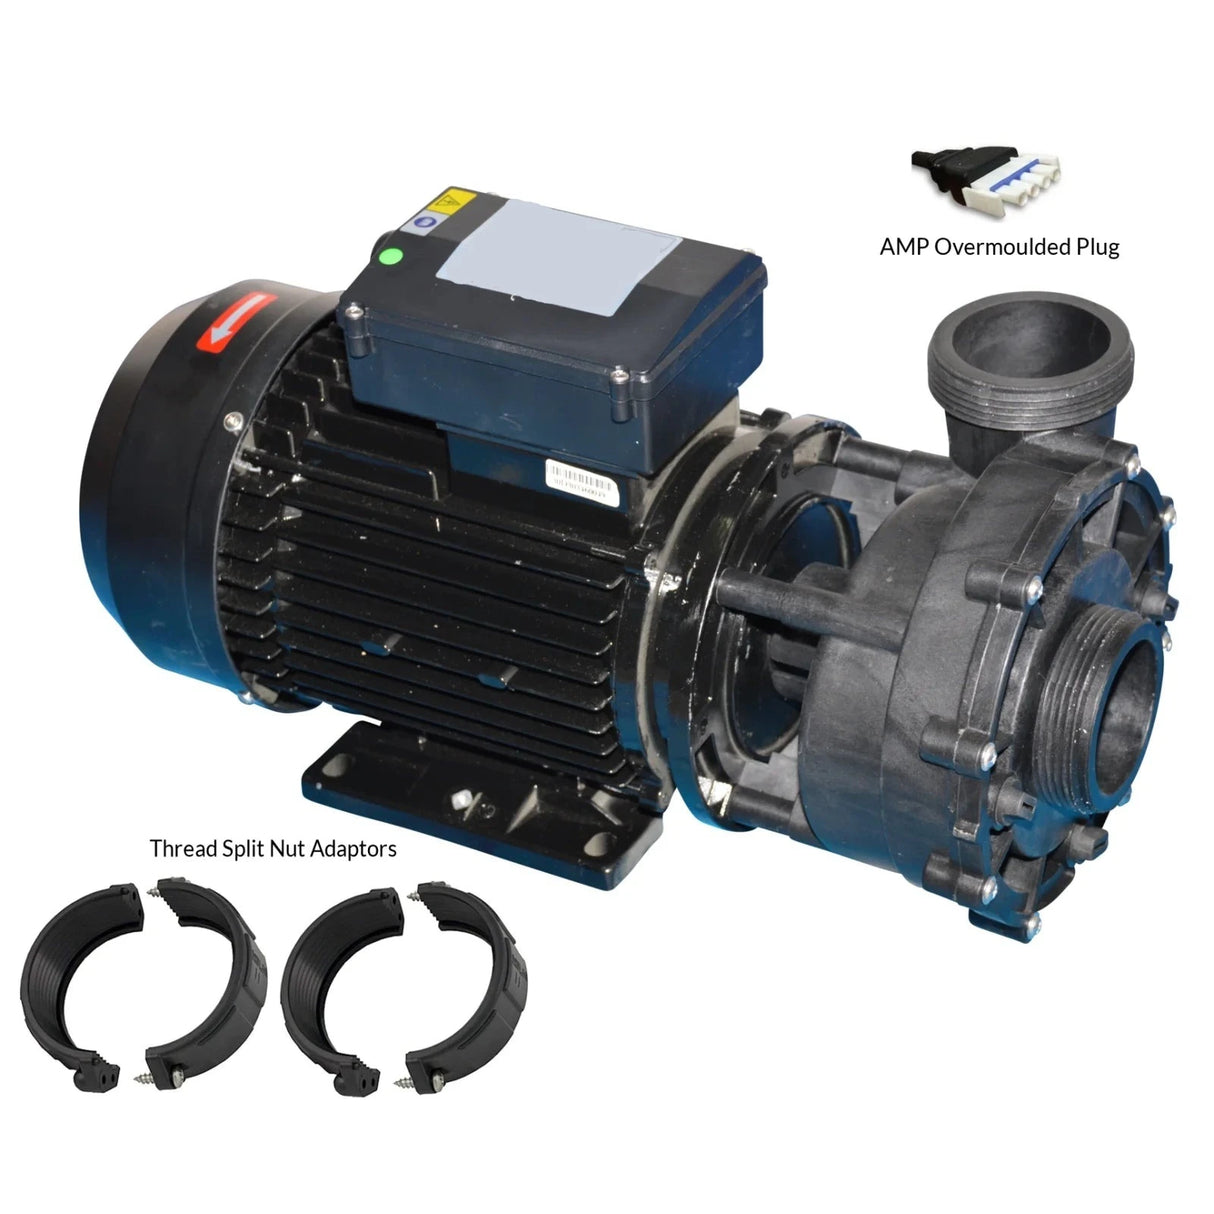 2.5 Hp Maxi-Flow Single Speed Spa Pump Replacement - Q6884 / 7252Ste-A17 2.5Hp 1-Speed Amp Plug